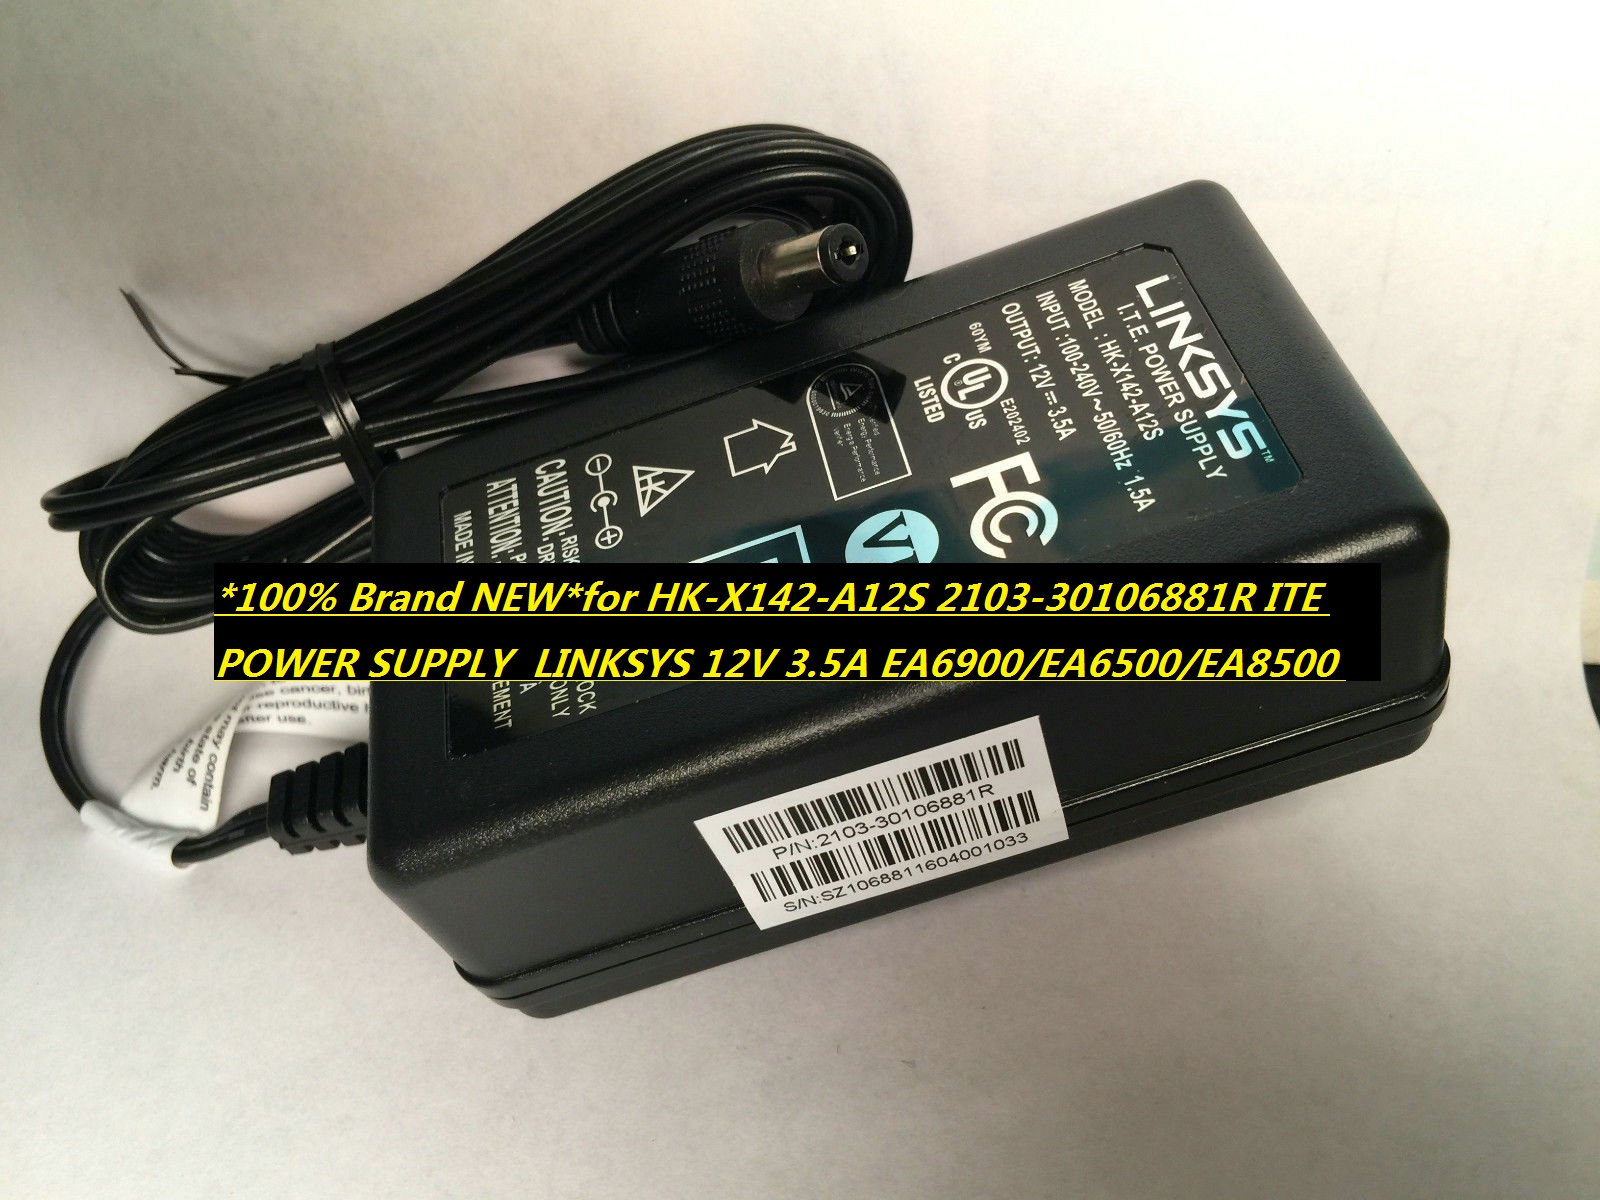 *100% Brand NEW*for HK-X142-A12S 2103-30106881R ITE POWER SUPPLY LINKSYS 12V 3.5A EA6900/EA6500/EA8